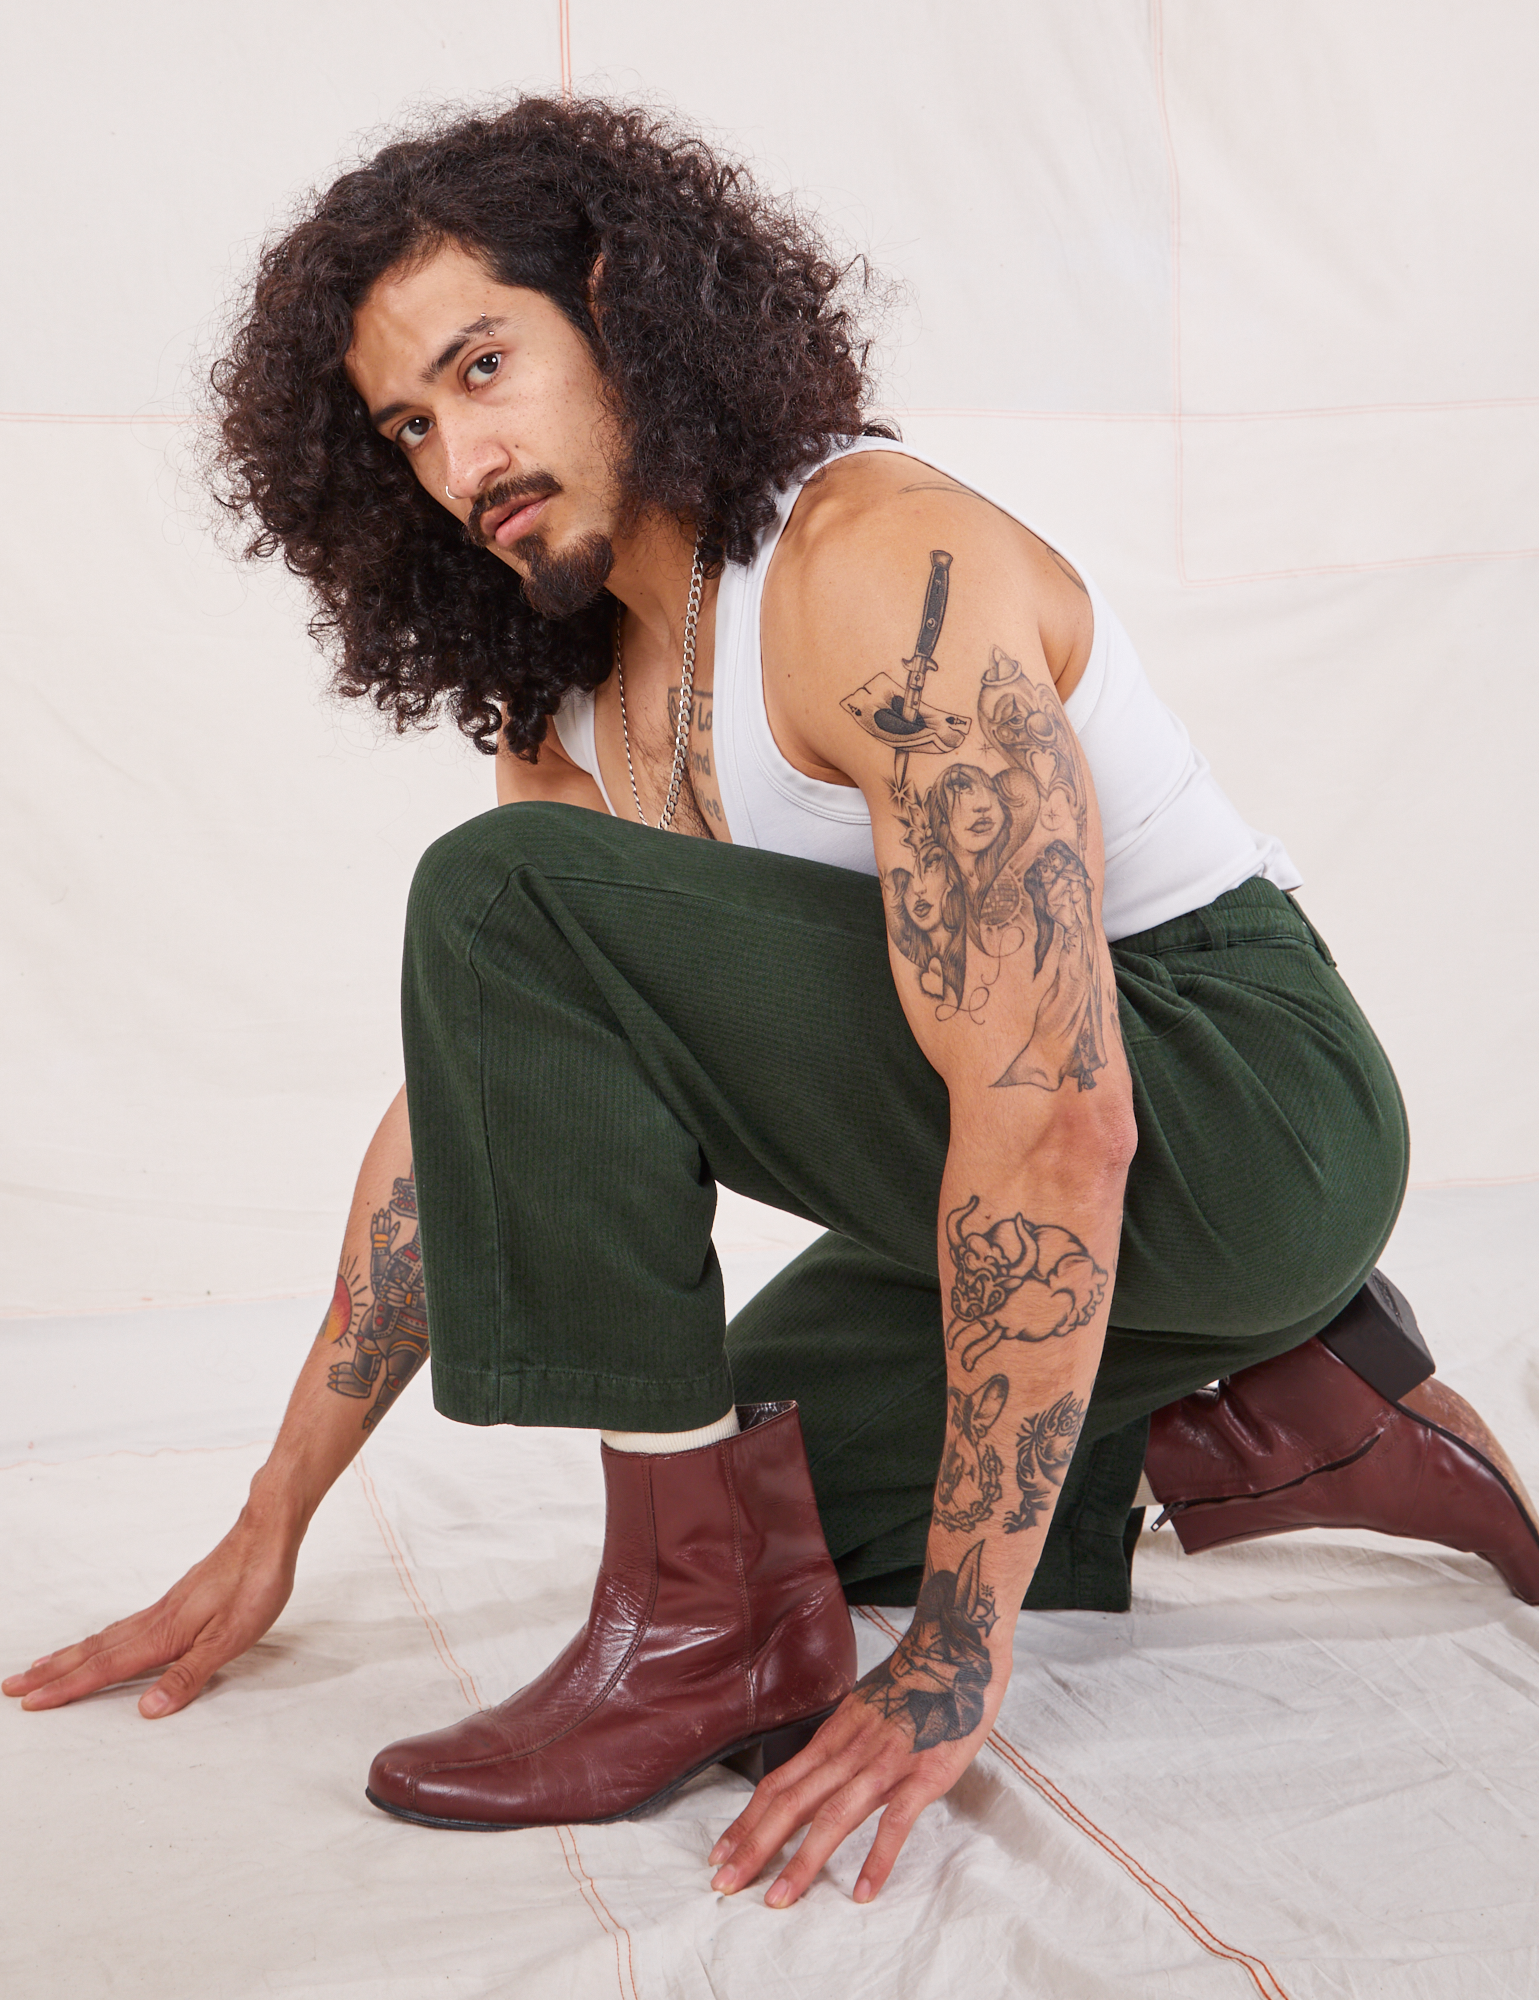 Jesse is wearing Heritage Trousers in Swamp Green and Cropped Tank Top in vintage in off-white